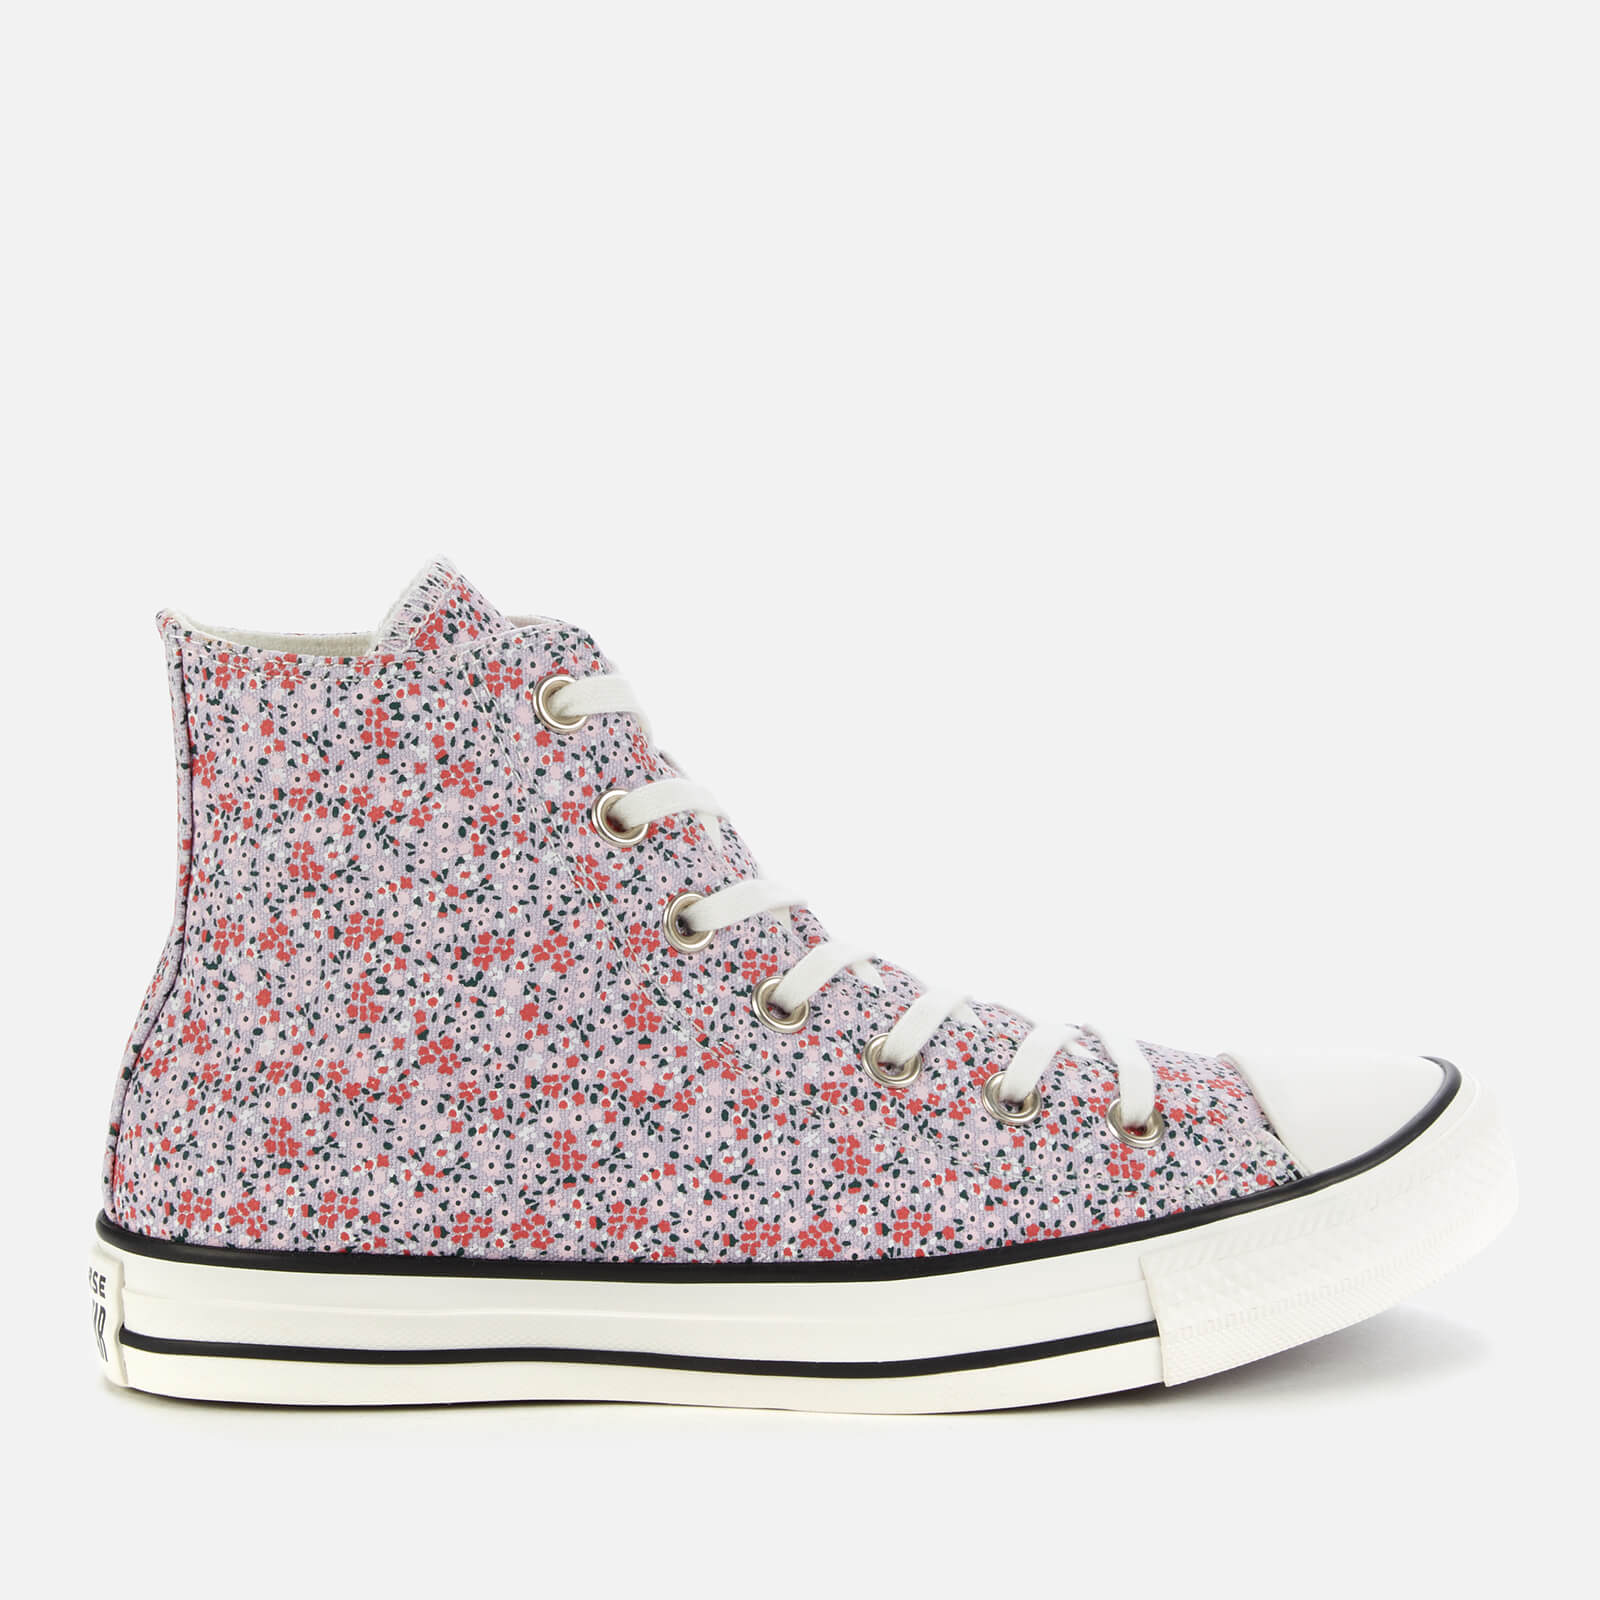 Converse Women's Chuck Taylor All Star Hi-Top Trainers - Vintage White/Pink Foam - UK 3